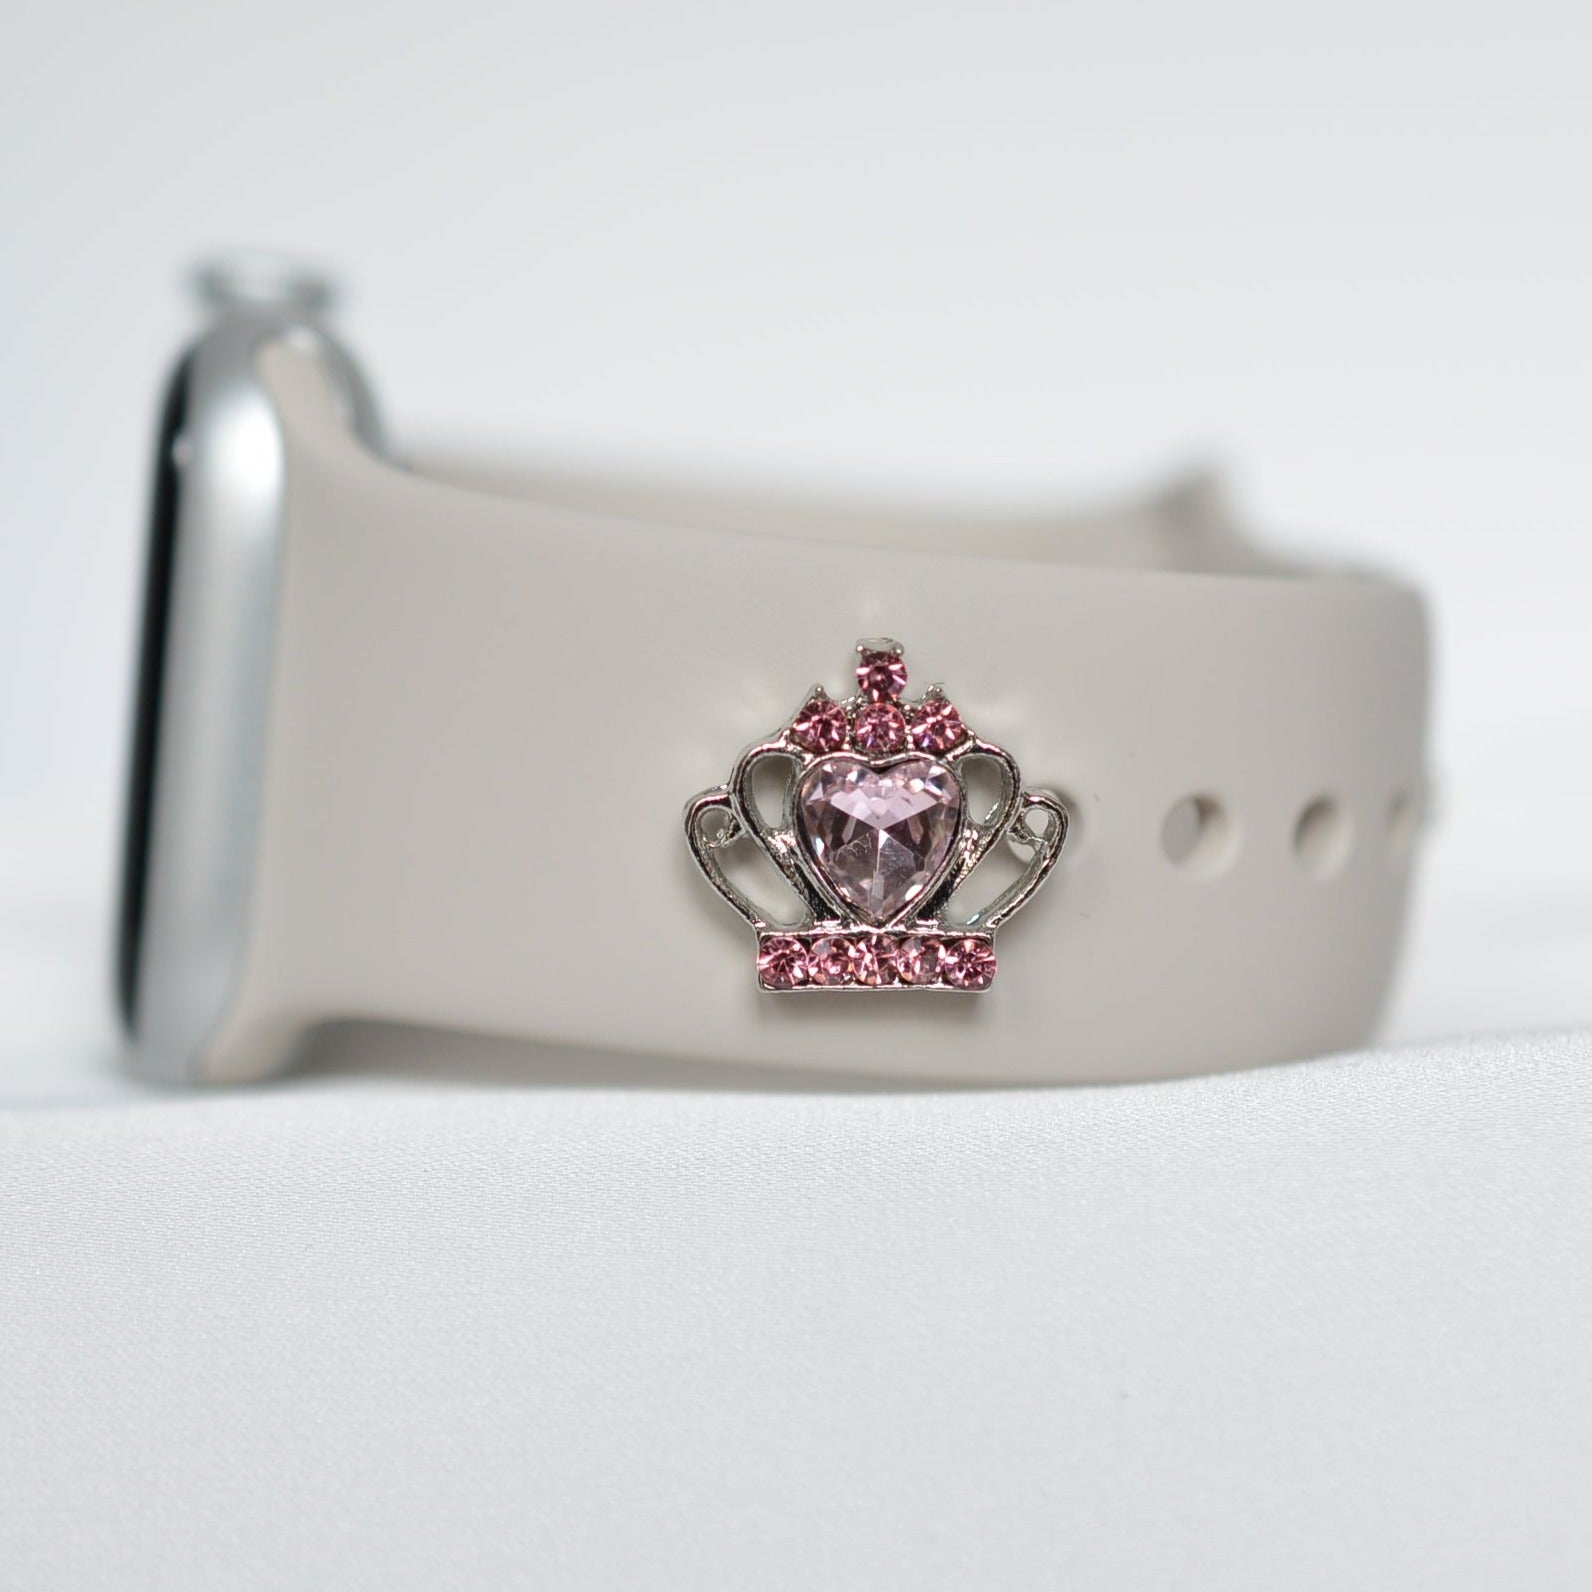 Pink Crown Charm for Belts, Bags and Watch Bands